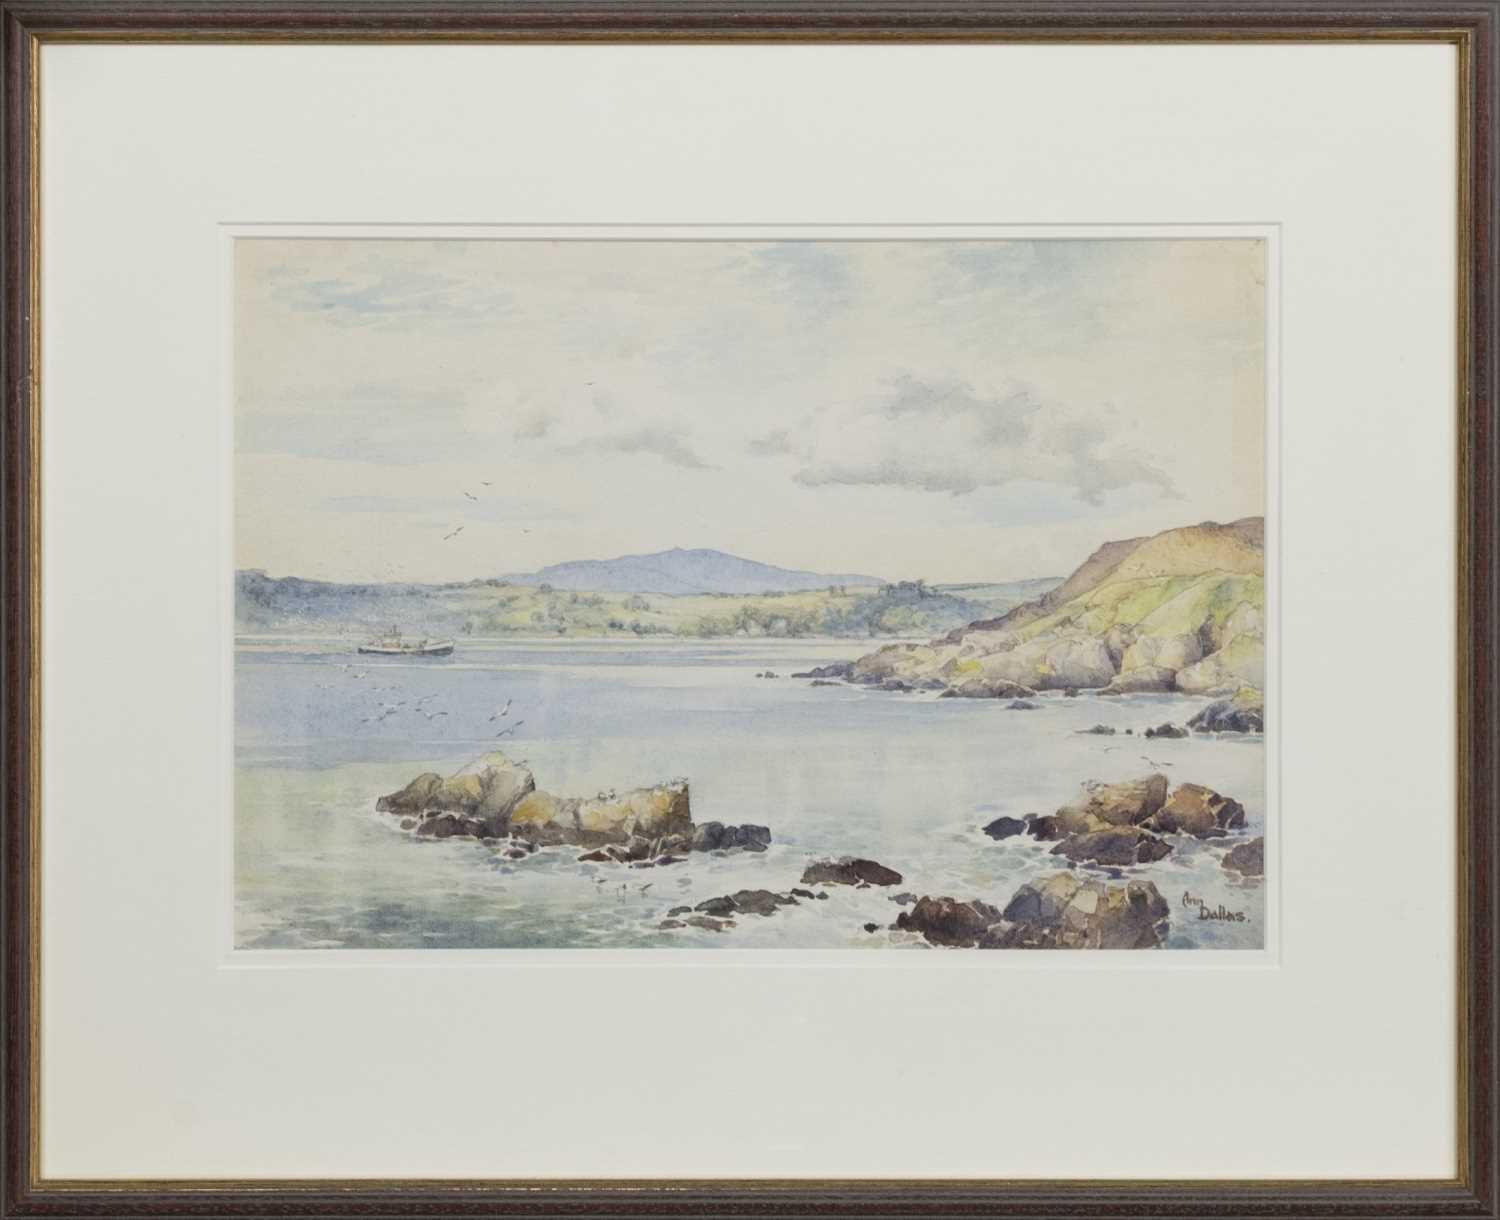 THE ACE FROM TURR POINT, A WATERCOLOUR BY ANN DALLAS